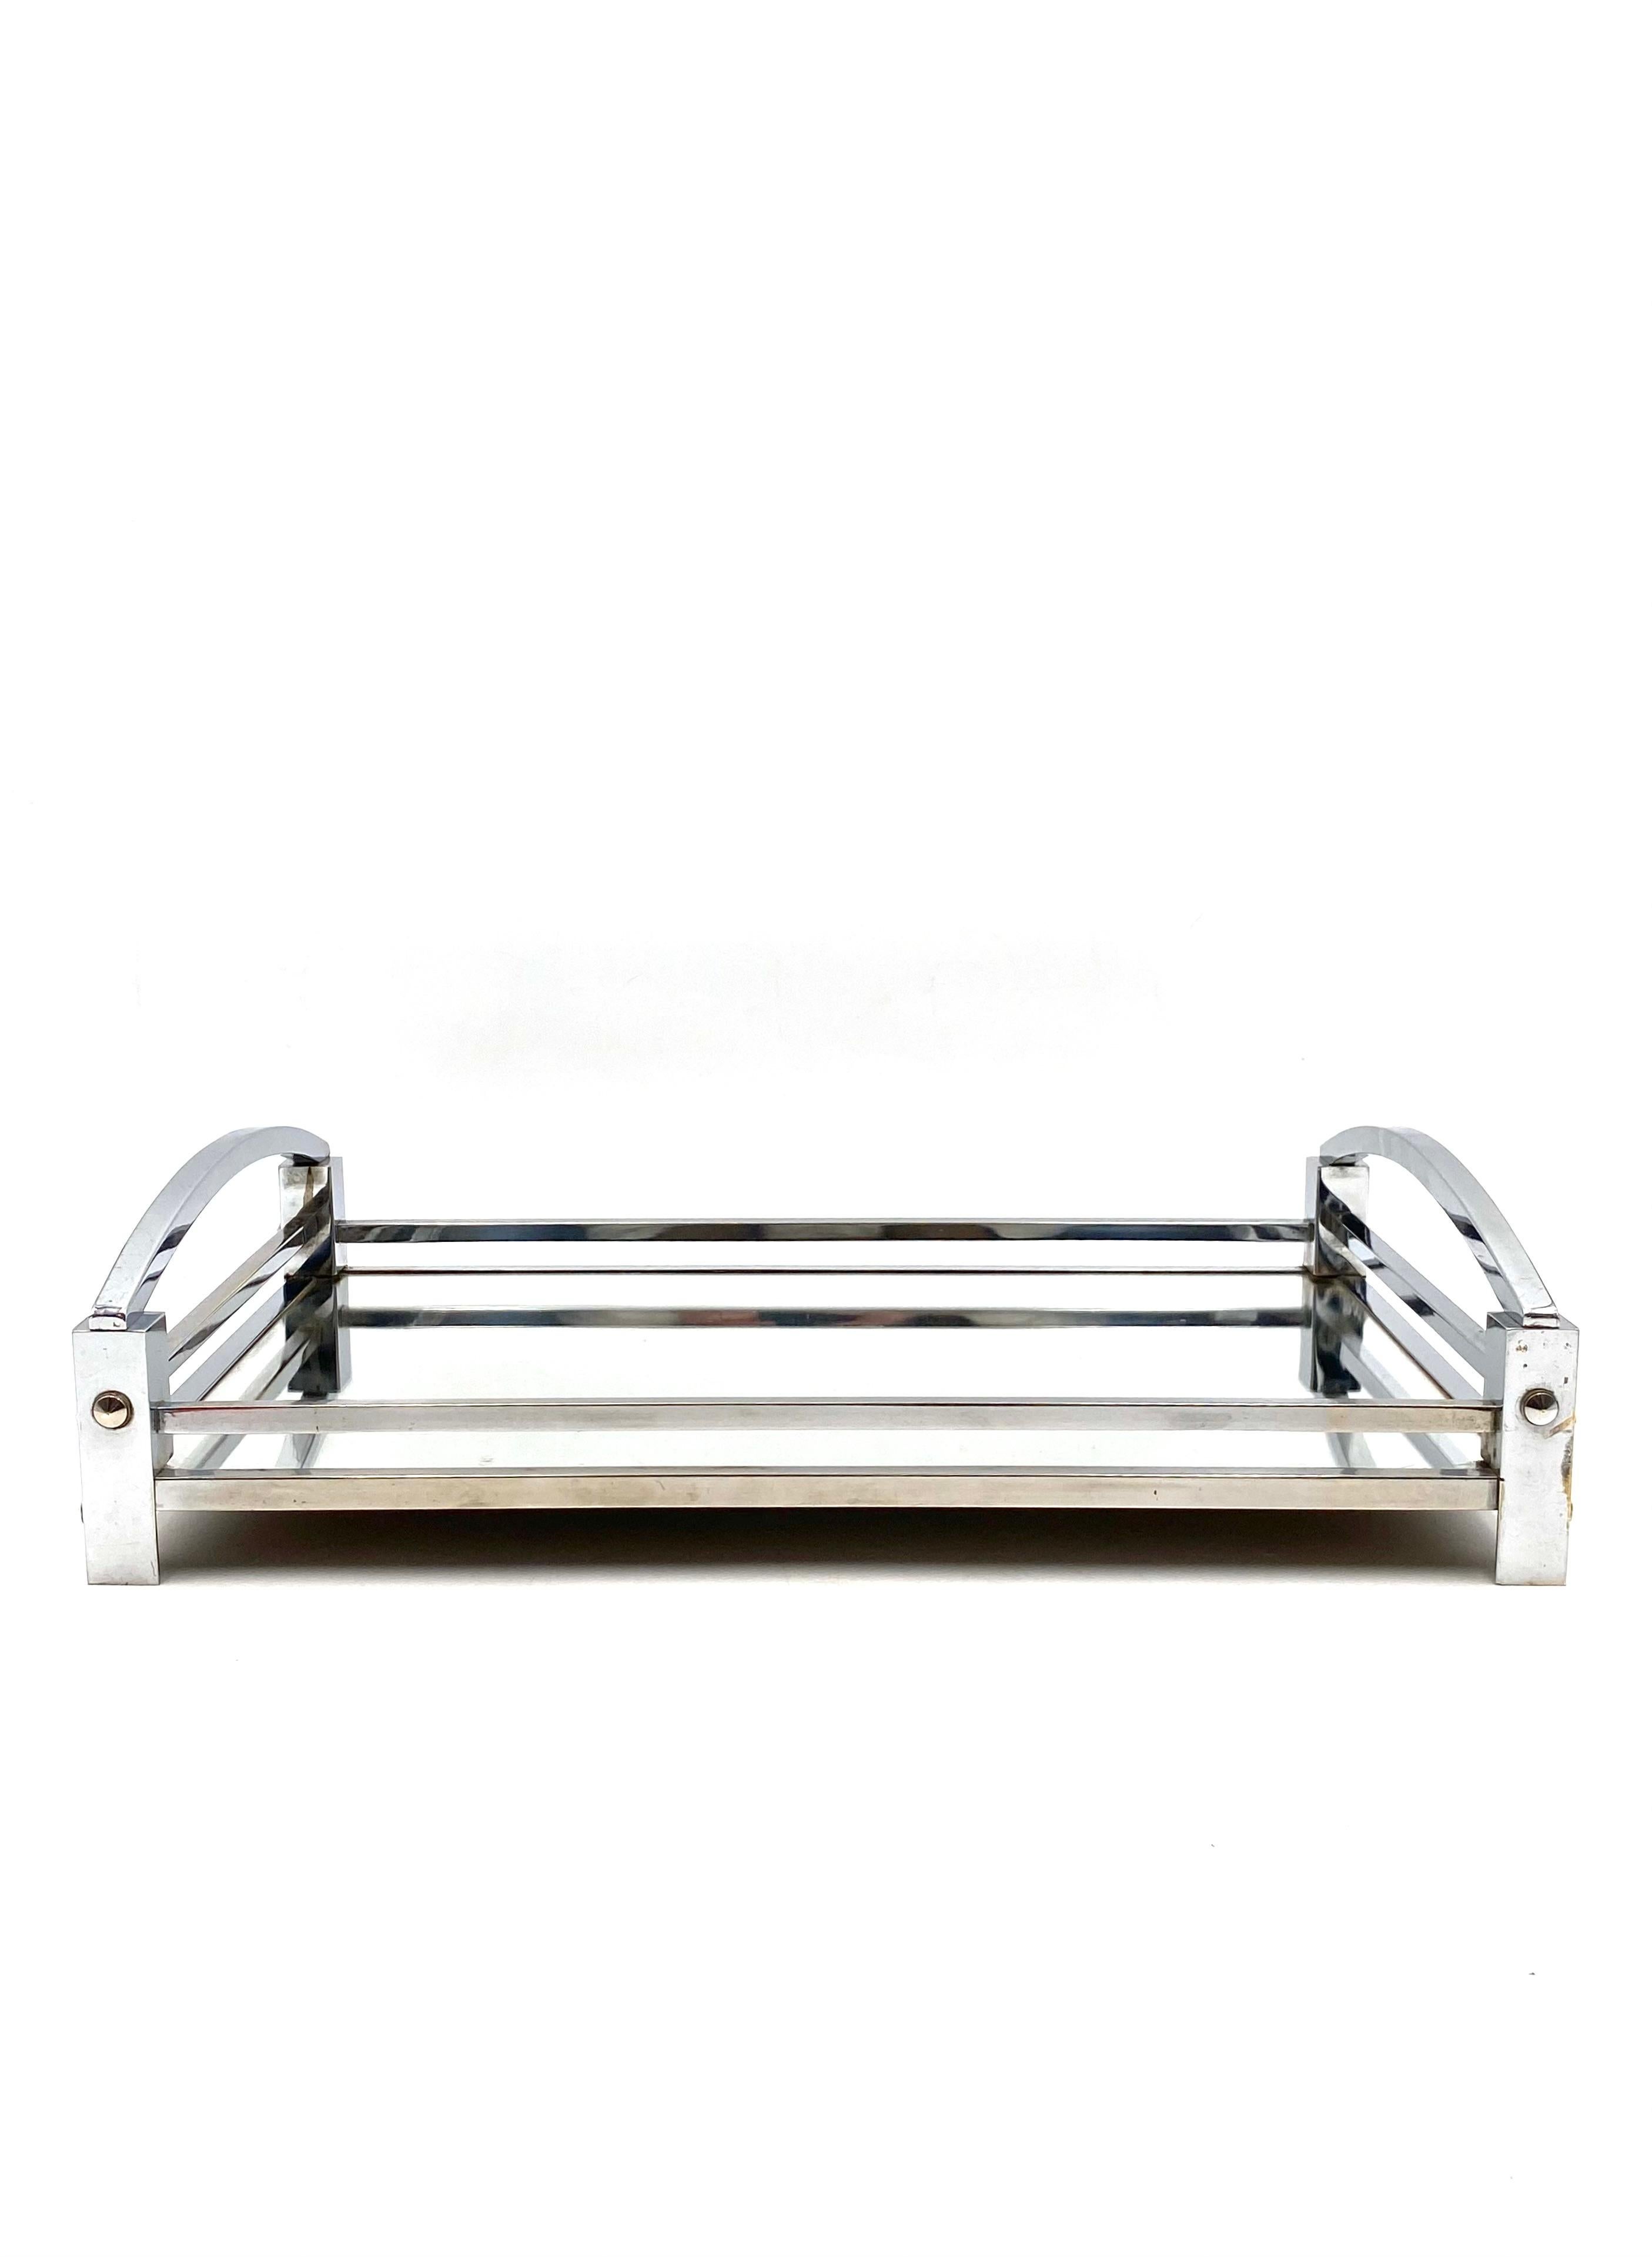 Jacques Adnet, Modernist Mirrored Tray, Maison Adnet, France, 1940-1950 For Sale 2